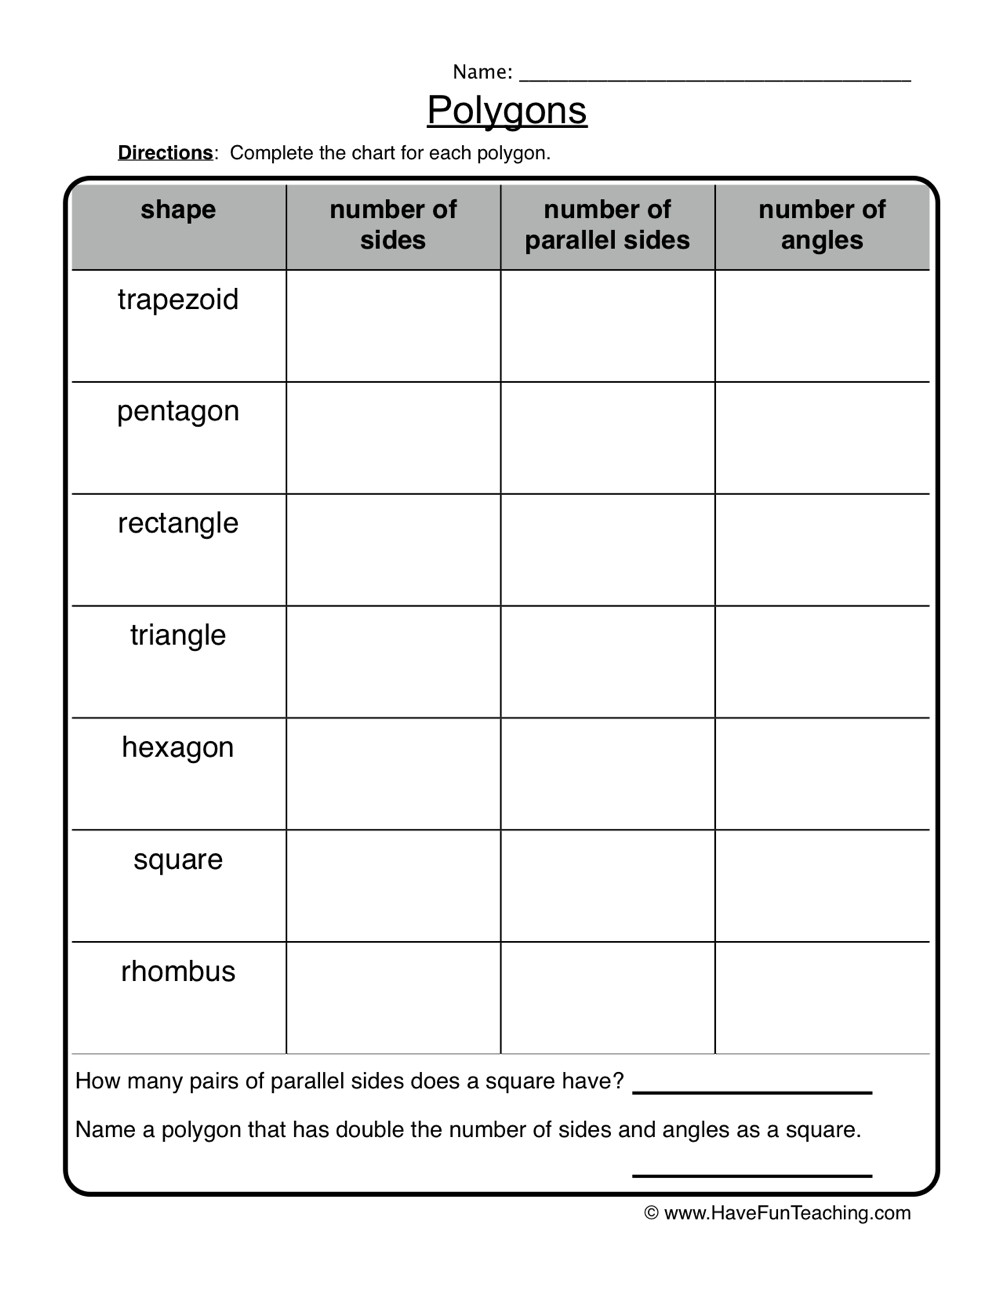 Polygon and Angles Worksheet Polygons attributes Worksheet